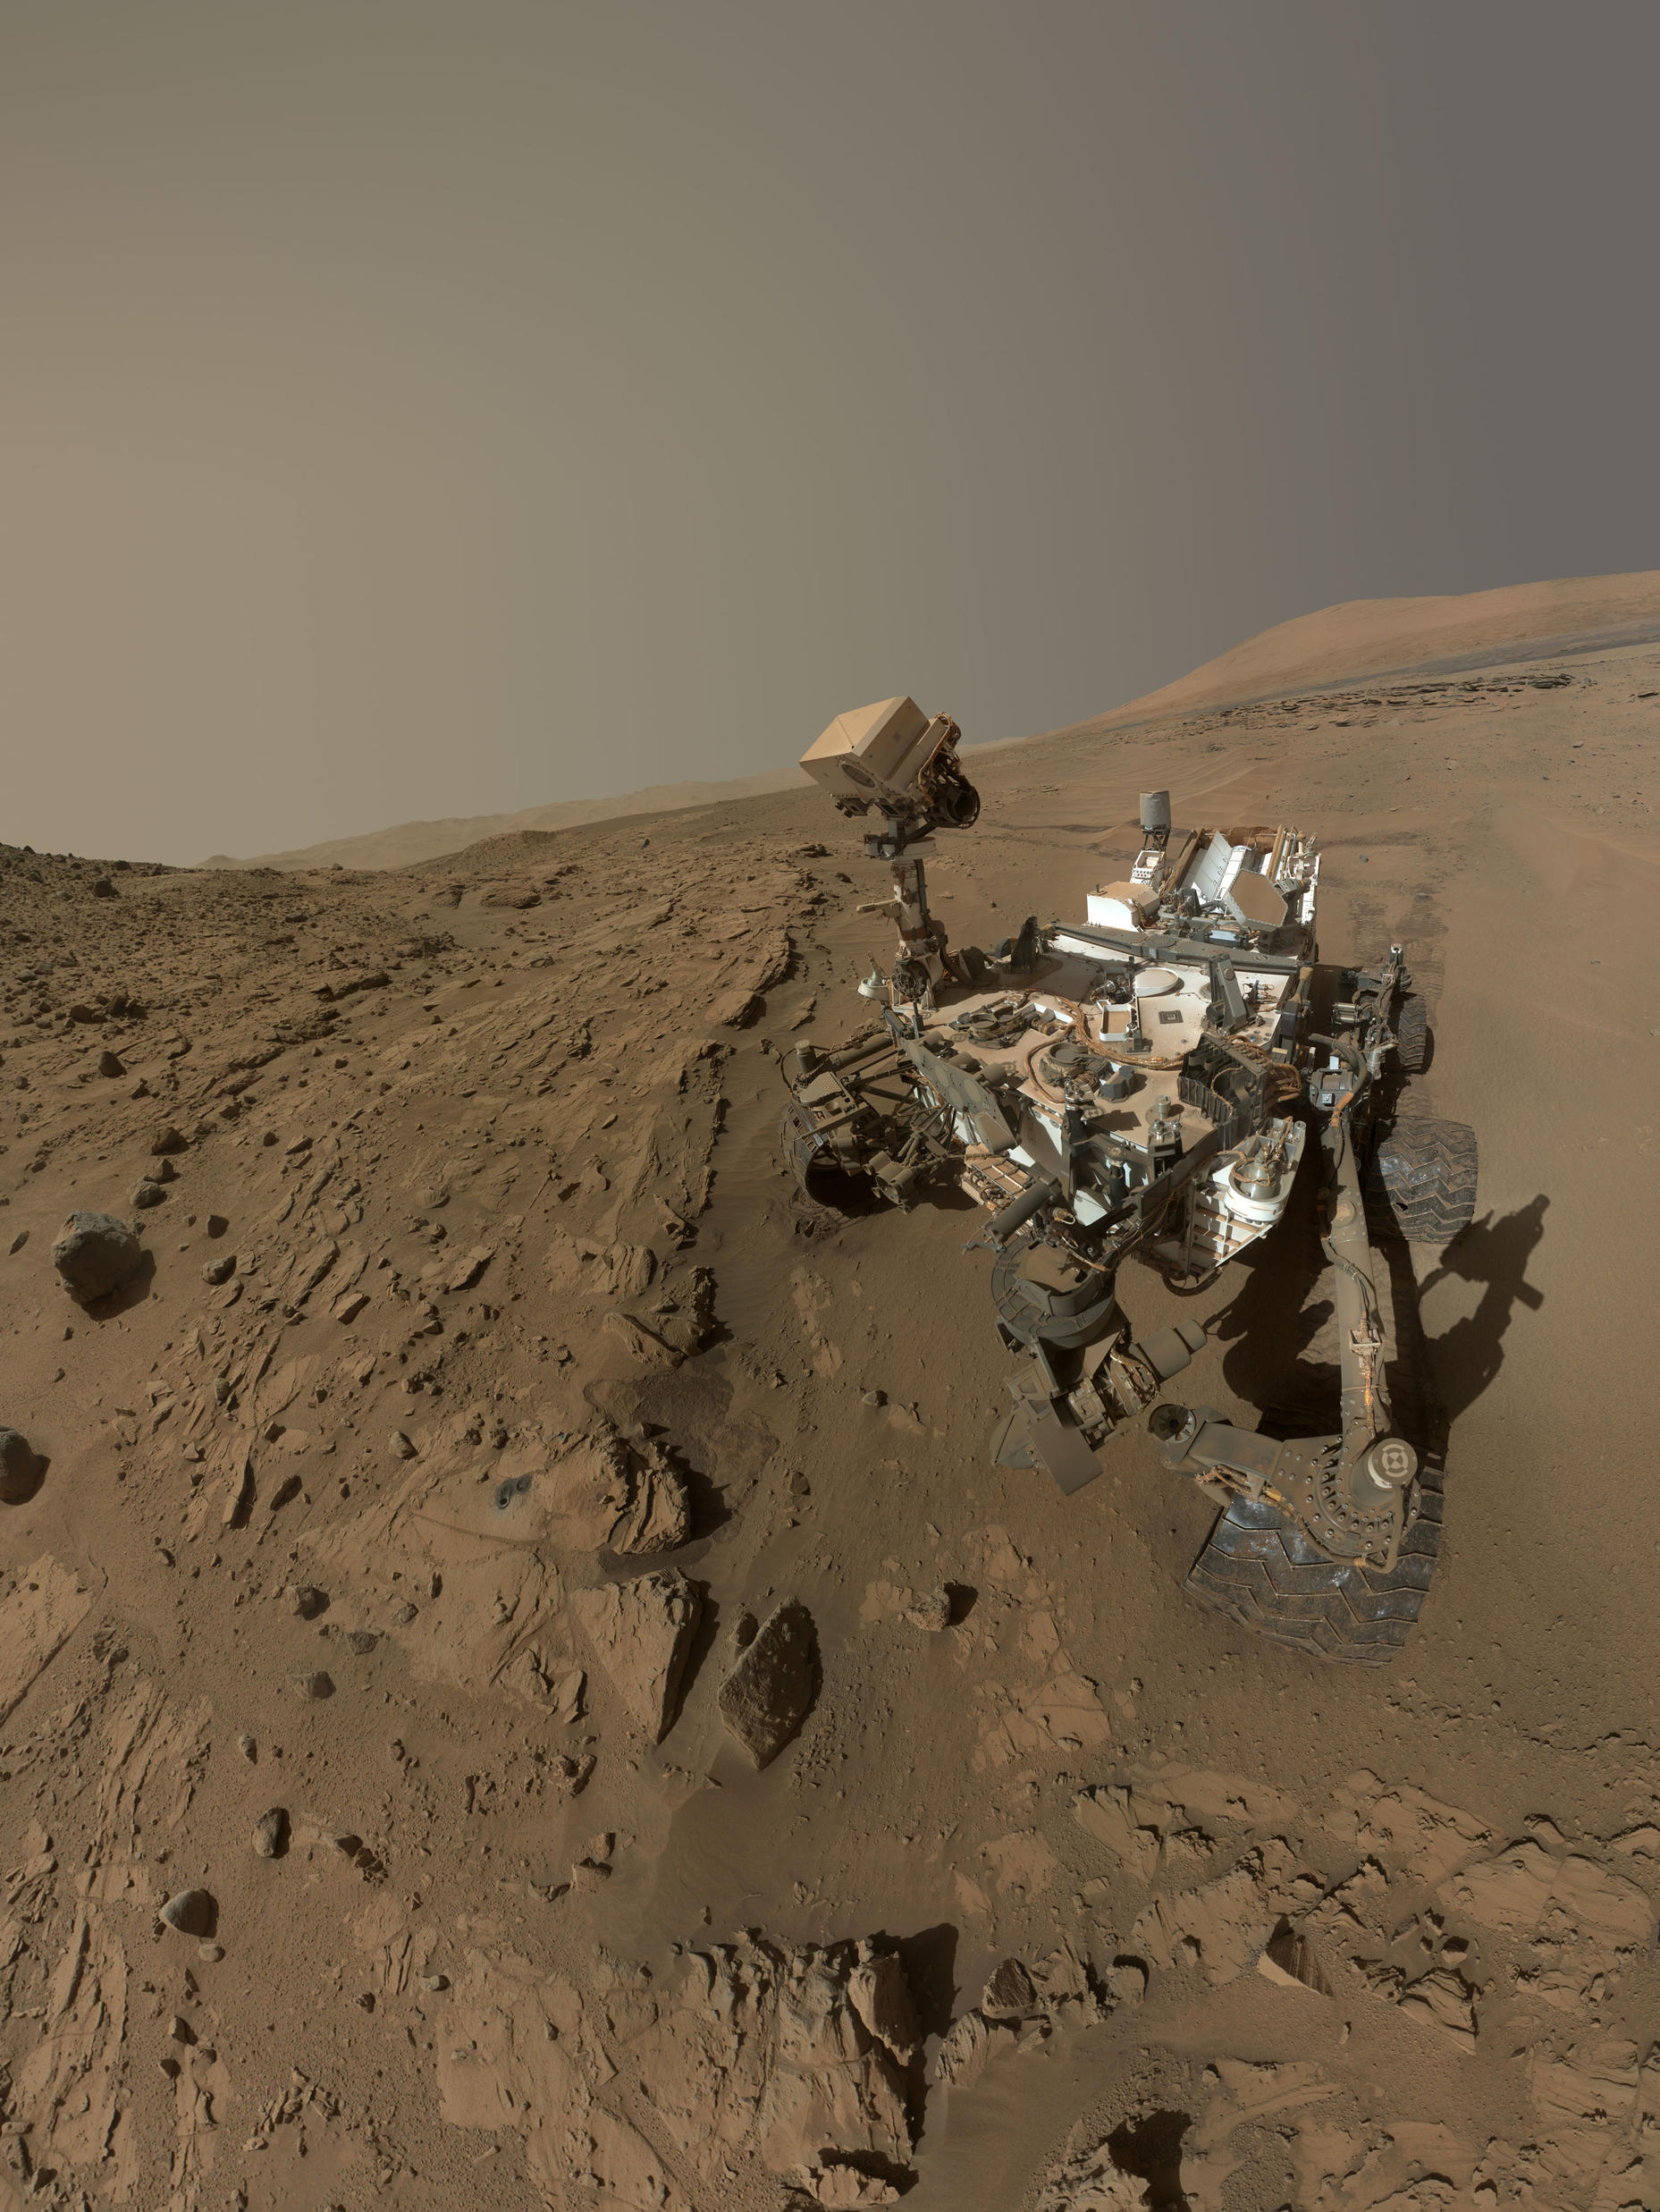 Curiosity, rover, self-portrait, rock, drilling, windjana, waypoint, kimberley - This image is a self-portrait of the Curiosity rover taken from the site with the rover's 'head' down, with rock formations surrounding it and Mount Sharp in the background.